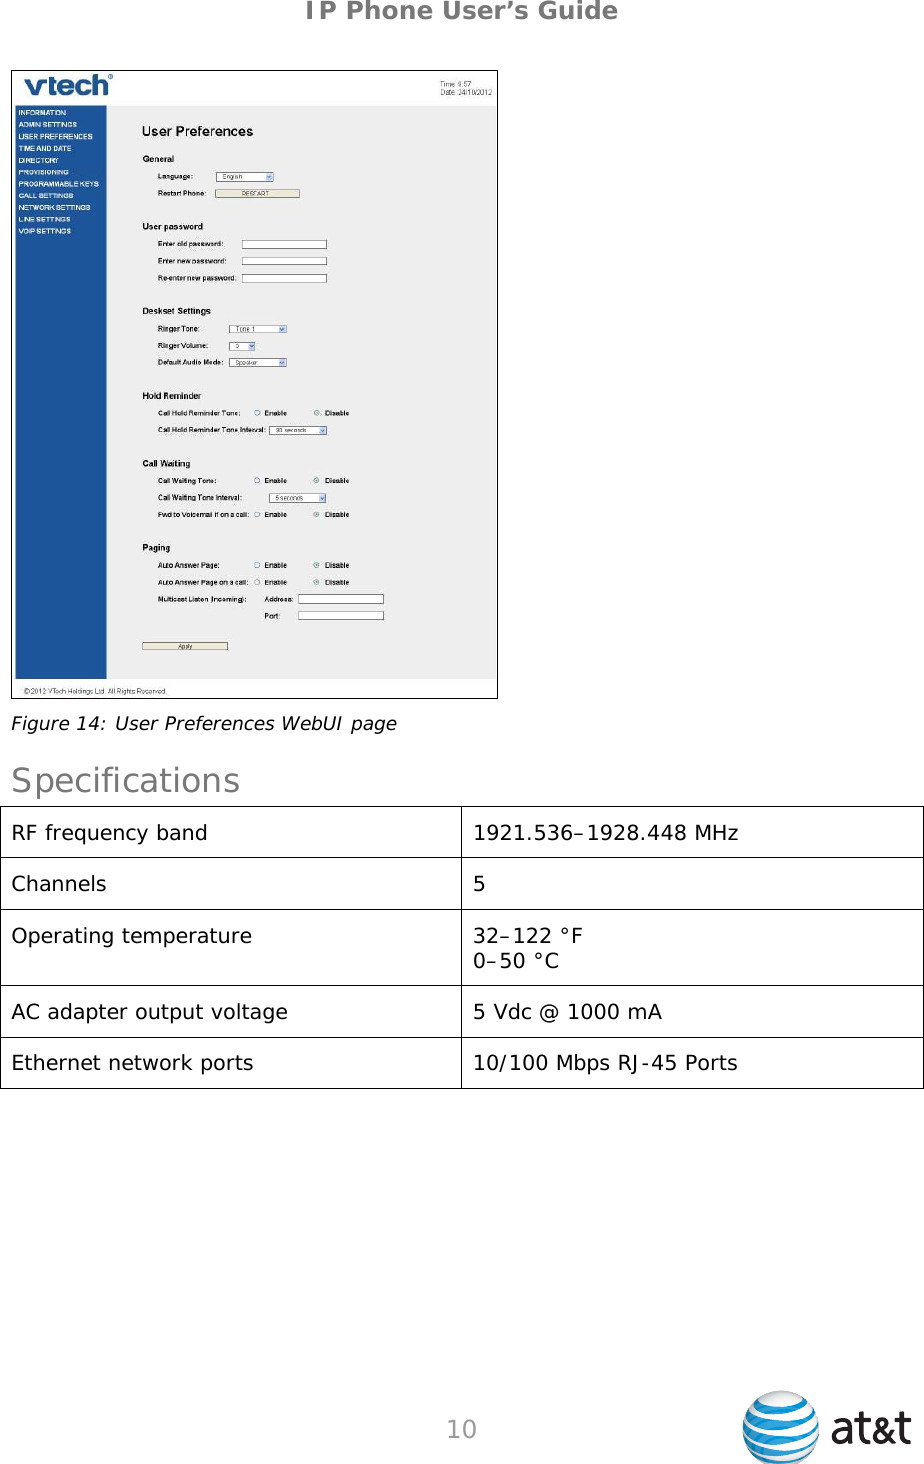 IP Phone User’s Guide  Figure 14: User Preferences WebUI page Specifications RF frequency band  1921.536–1928.448 MHz Channels 5 Operating temperature  32–122 °F 0–50 °C AC adapter output voltage  5 Vdc @ 1000 mA Ethernet network ports  10/100 Mbps RJ-45 Ports  10   